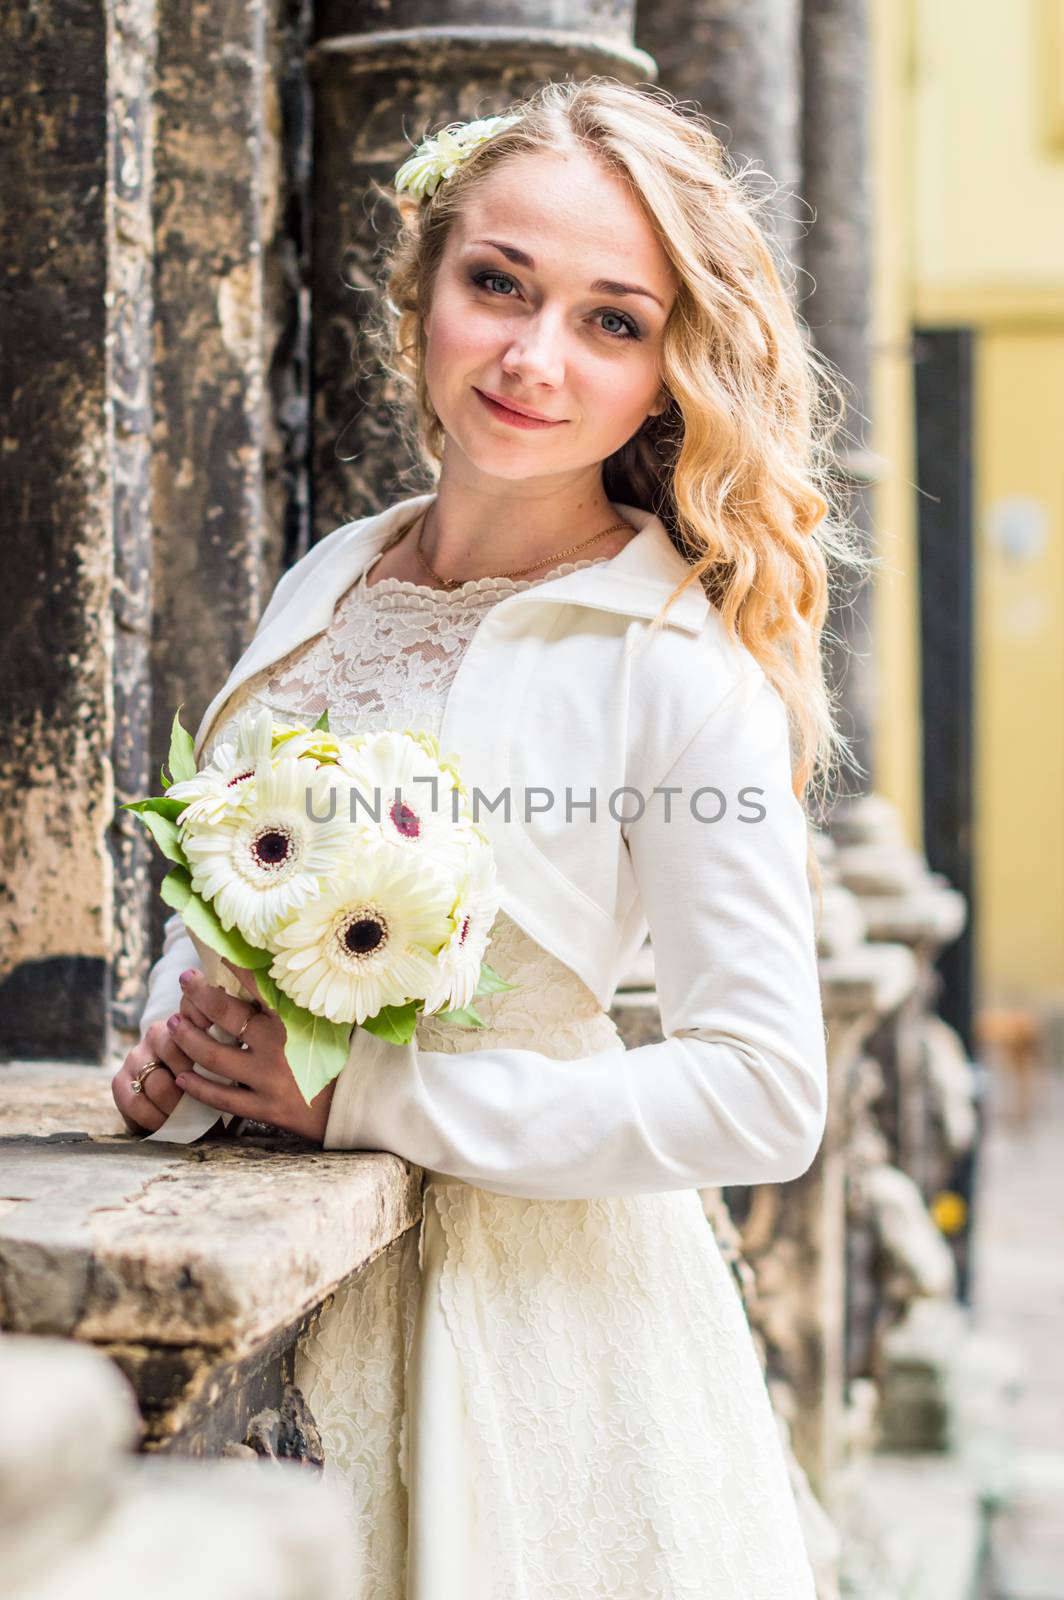 Portrait of a bride in a white dress in the city